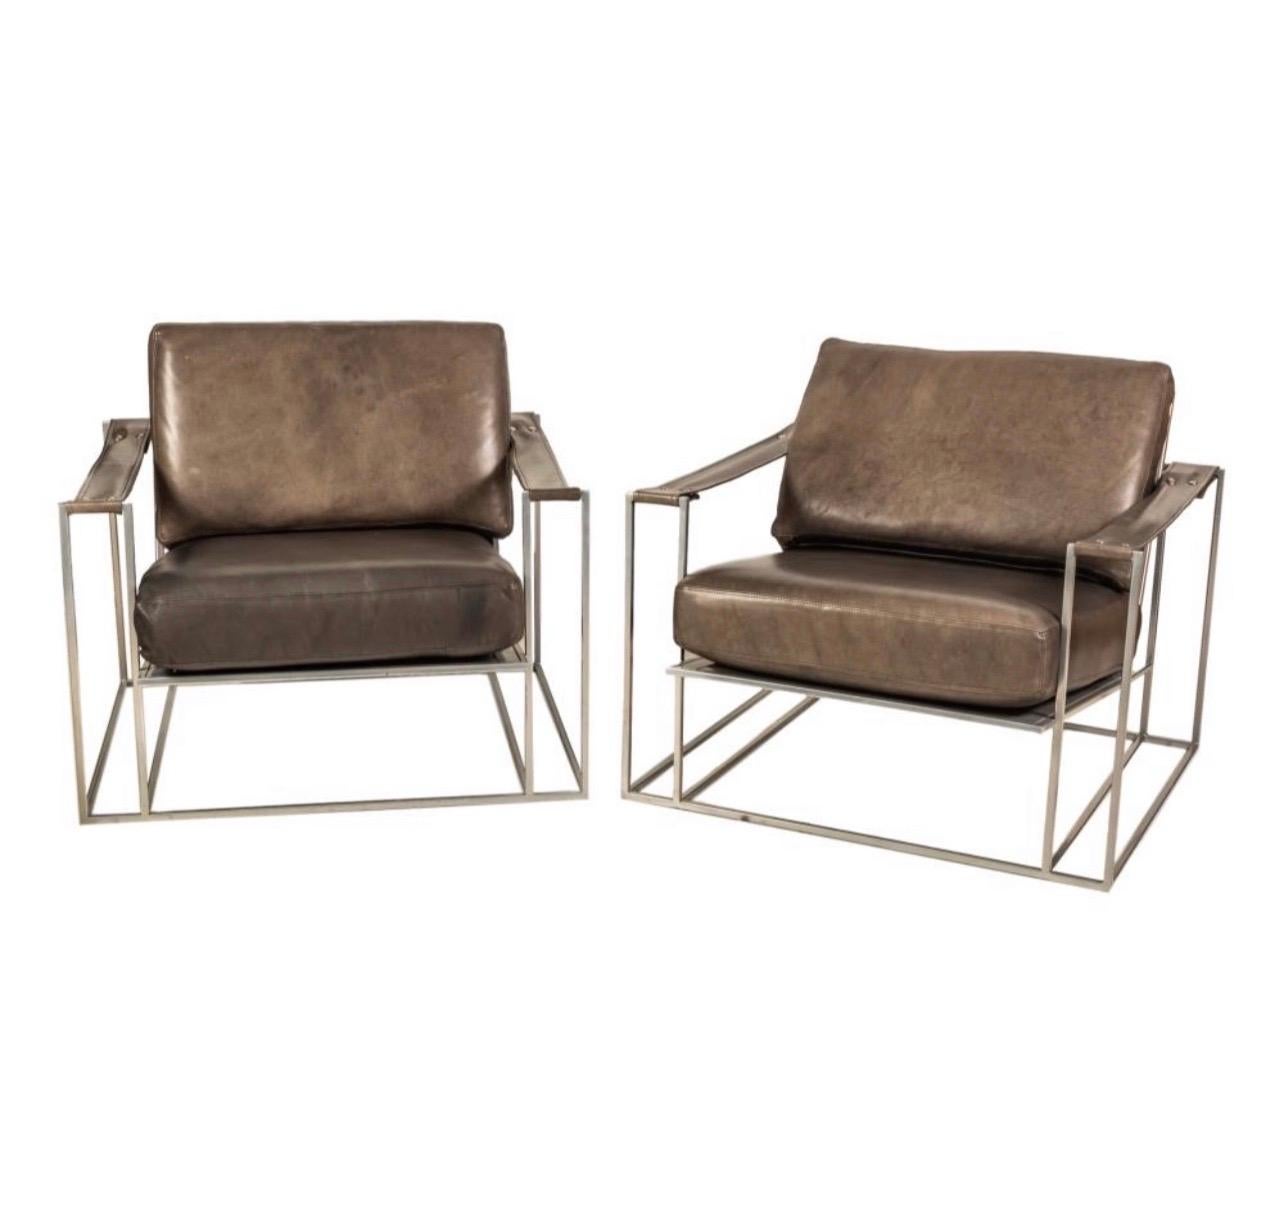 A Pair of Milo Baughman arm chairs manufactured for Thayer Coggin. 
They retain the original faux leather upholstery in dark grey/brownish tones.
Designed by Milo Baughman in 1972.